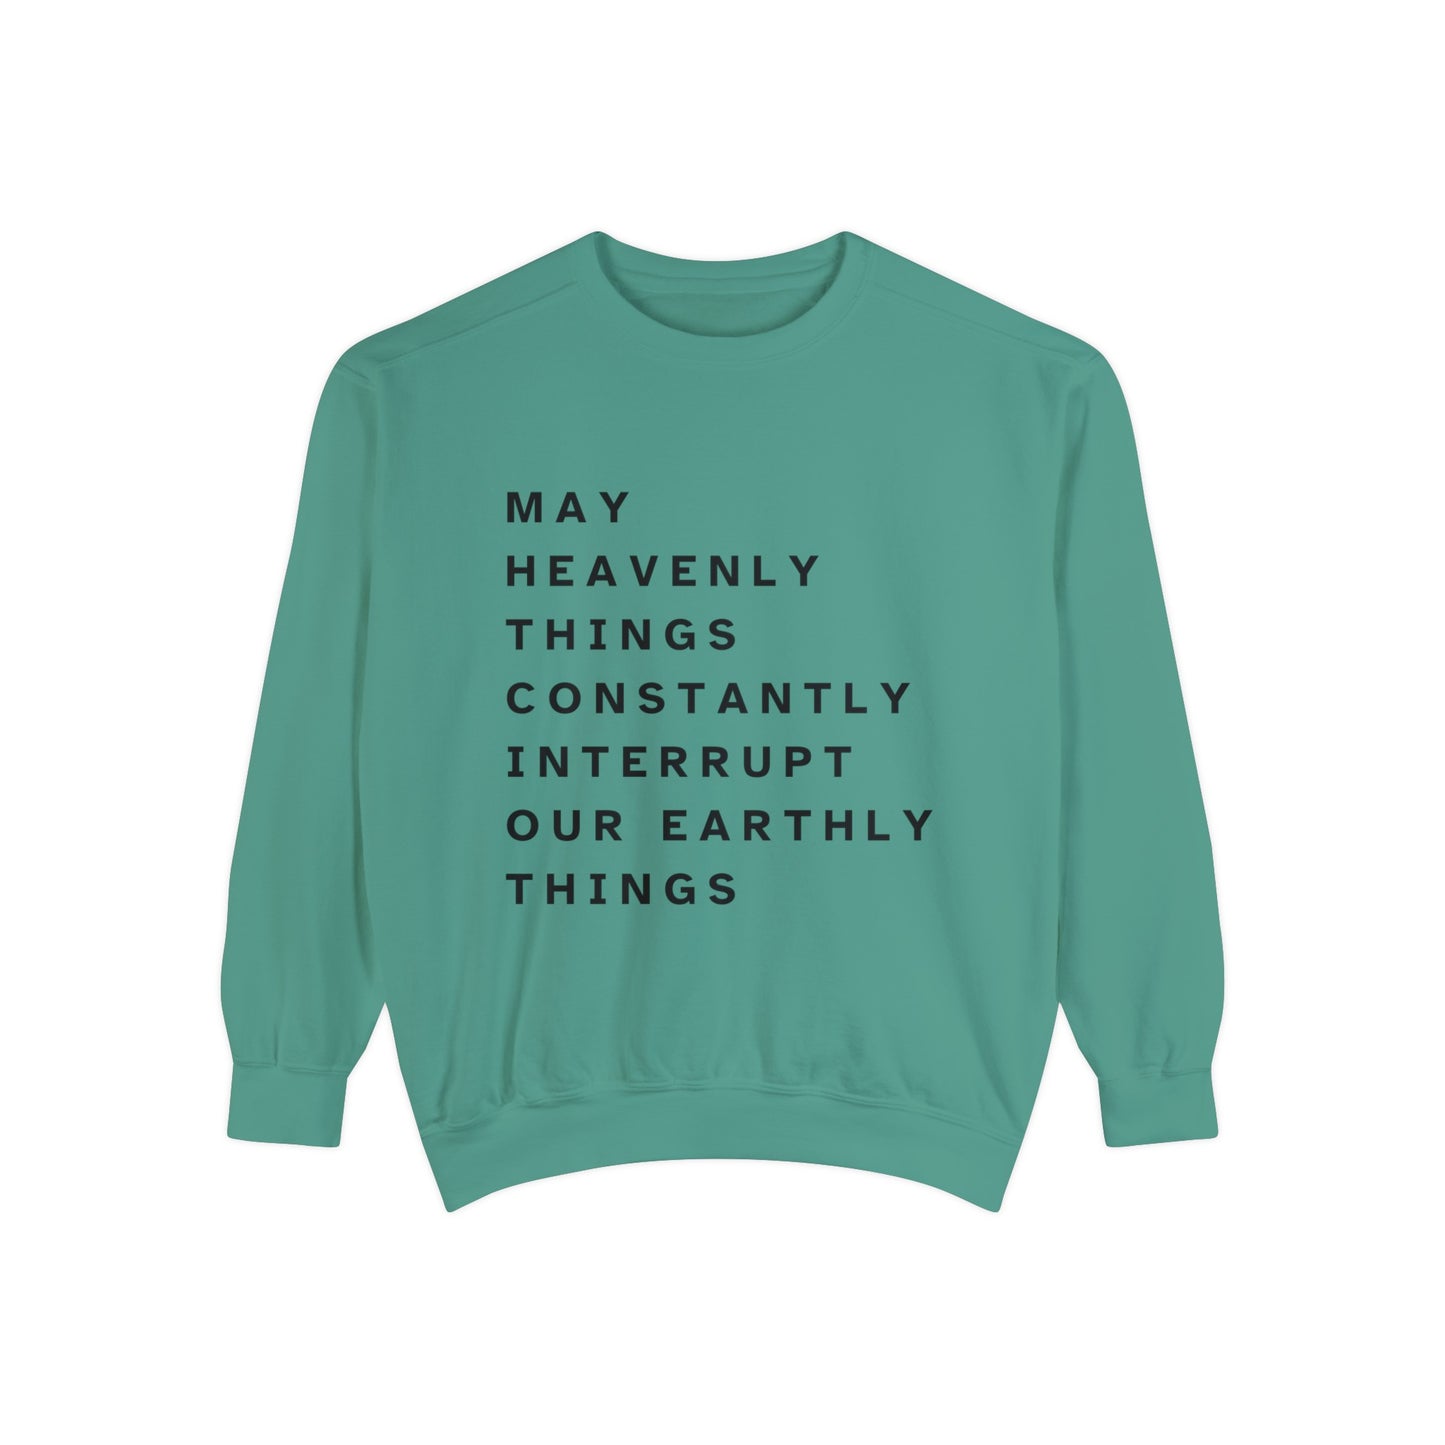 May Heavenly Things Constantly Interrupt Earthly Things Unisex Garment-Dyed Sweatshirt